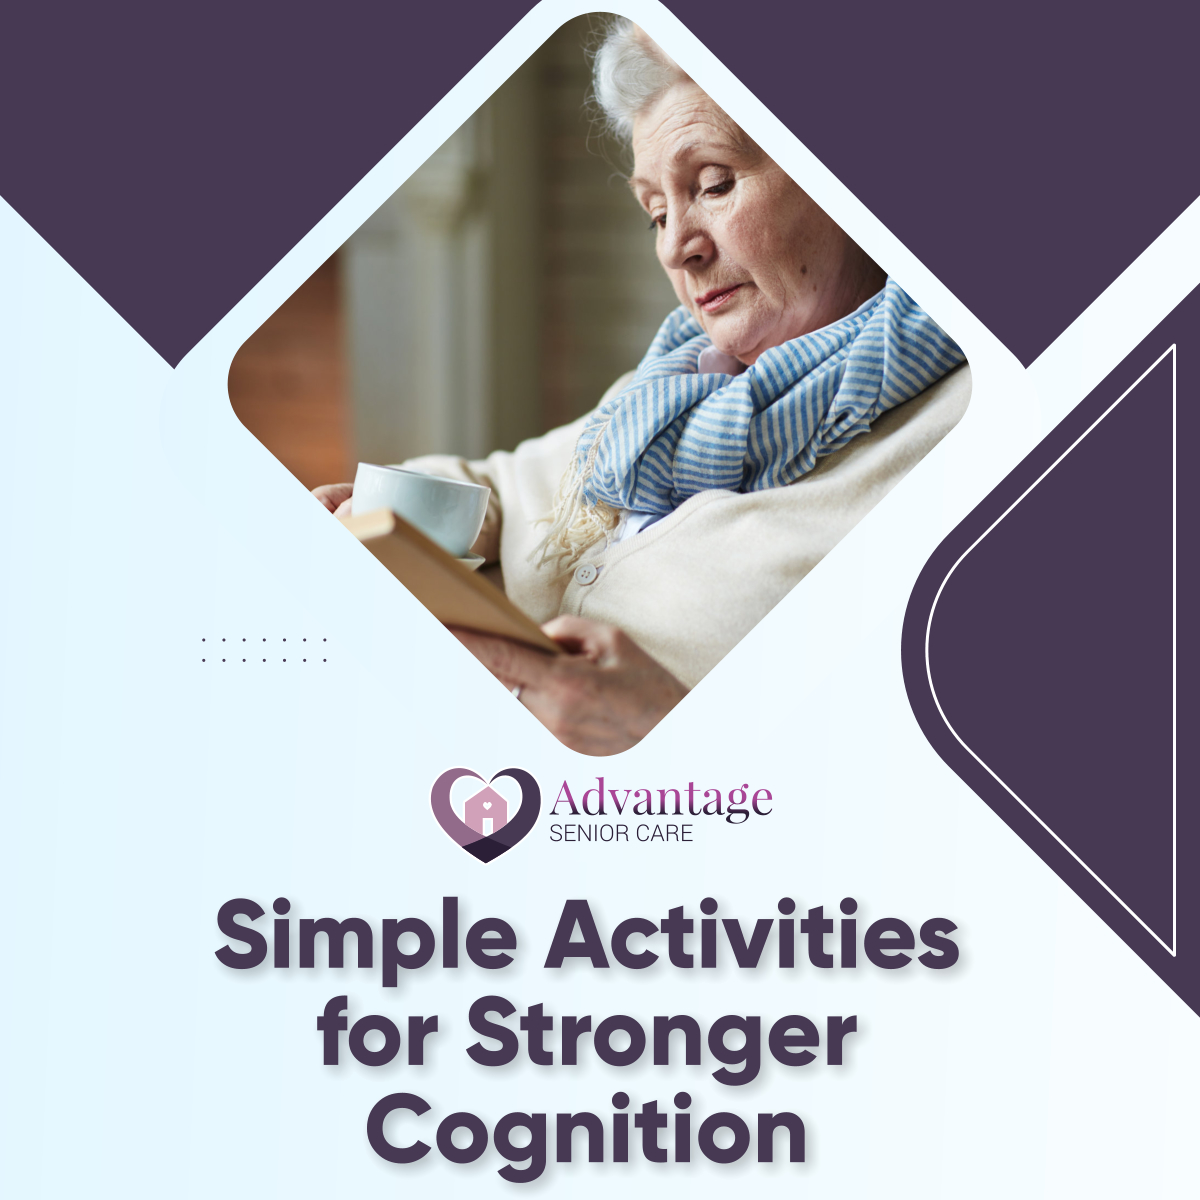 Strong cognition ensures we can meet the many demands of life. Unfortunately, cognitive decline may come with aging. 

Read more:
facebook.com/AdvantageSnrC/…
 
#IndianapolisIN #InHomeCare #SimpleActivities #Cognition  #CognitiveDecline